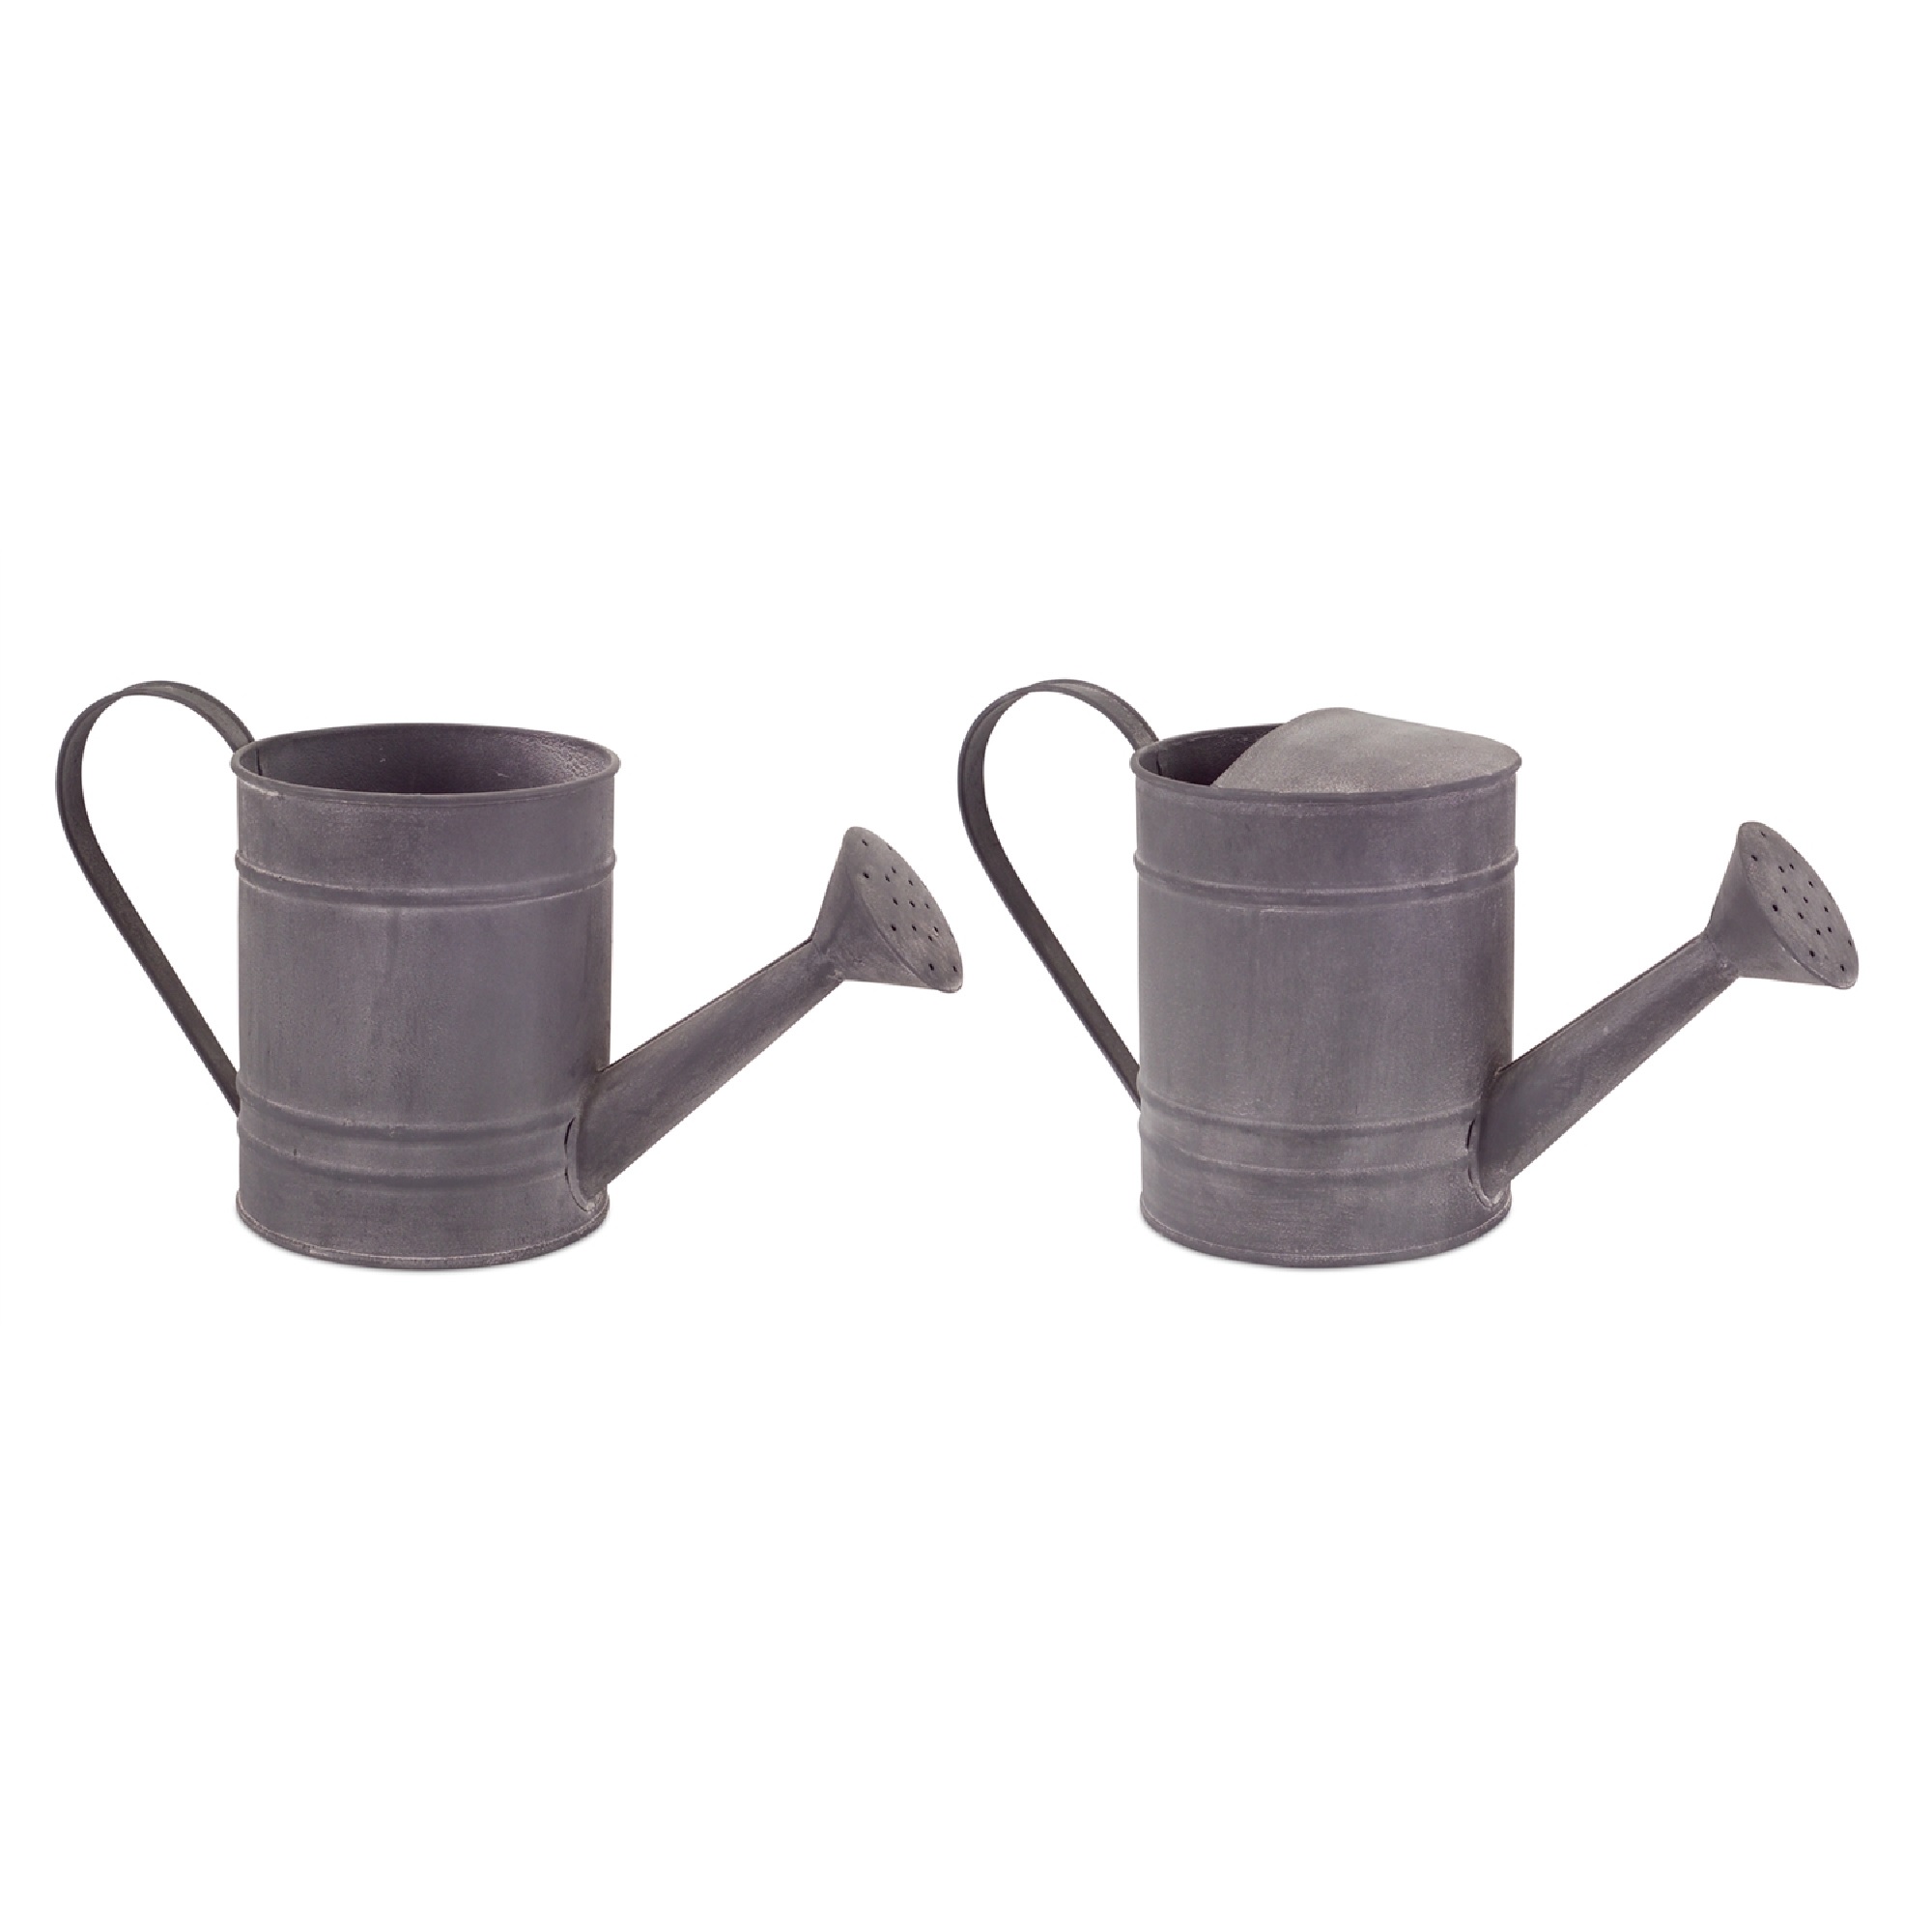 Melrose 5.75" Galvanized Outdoor Watering Can Planters with Handle 6pc - Gray - image 1 of 1